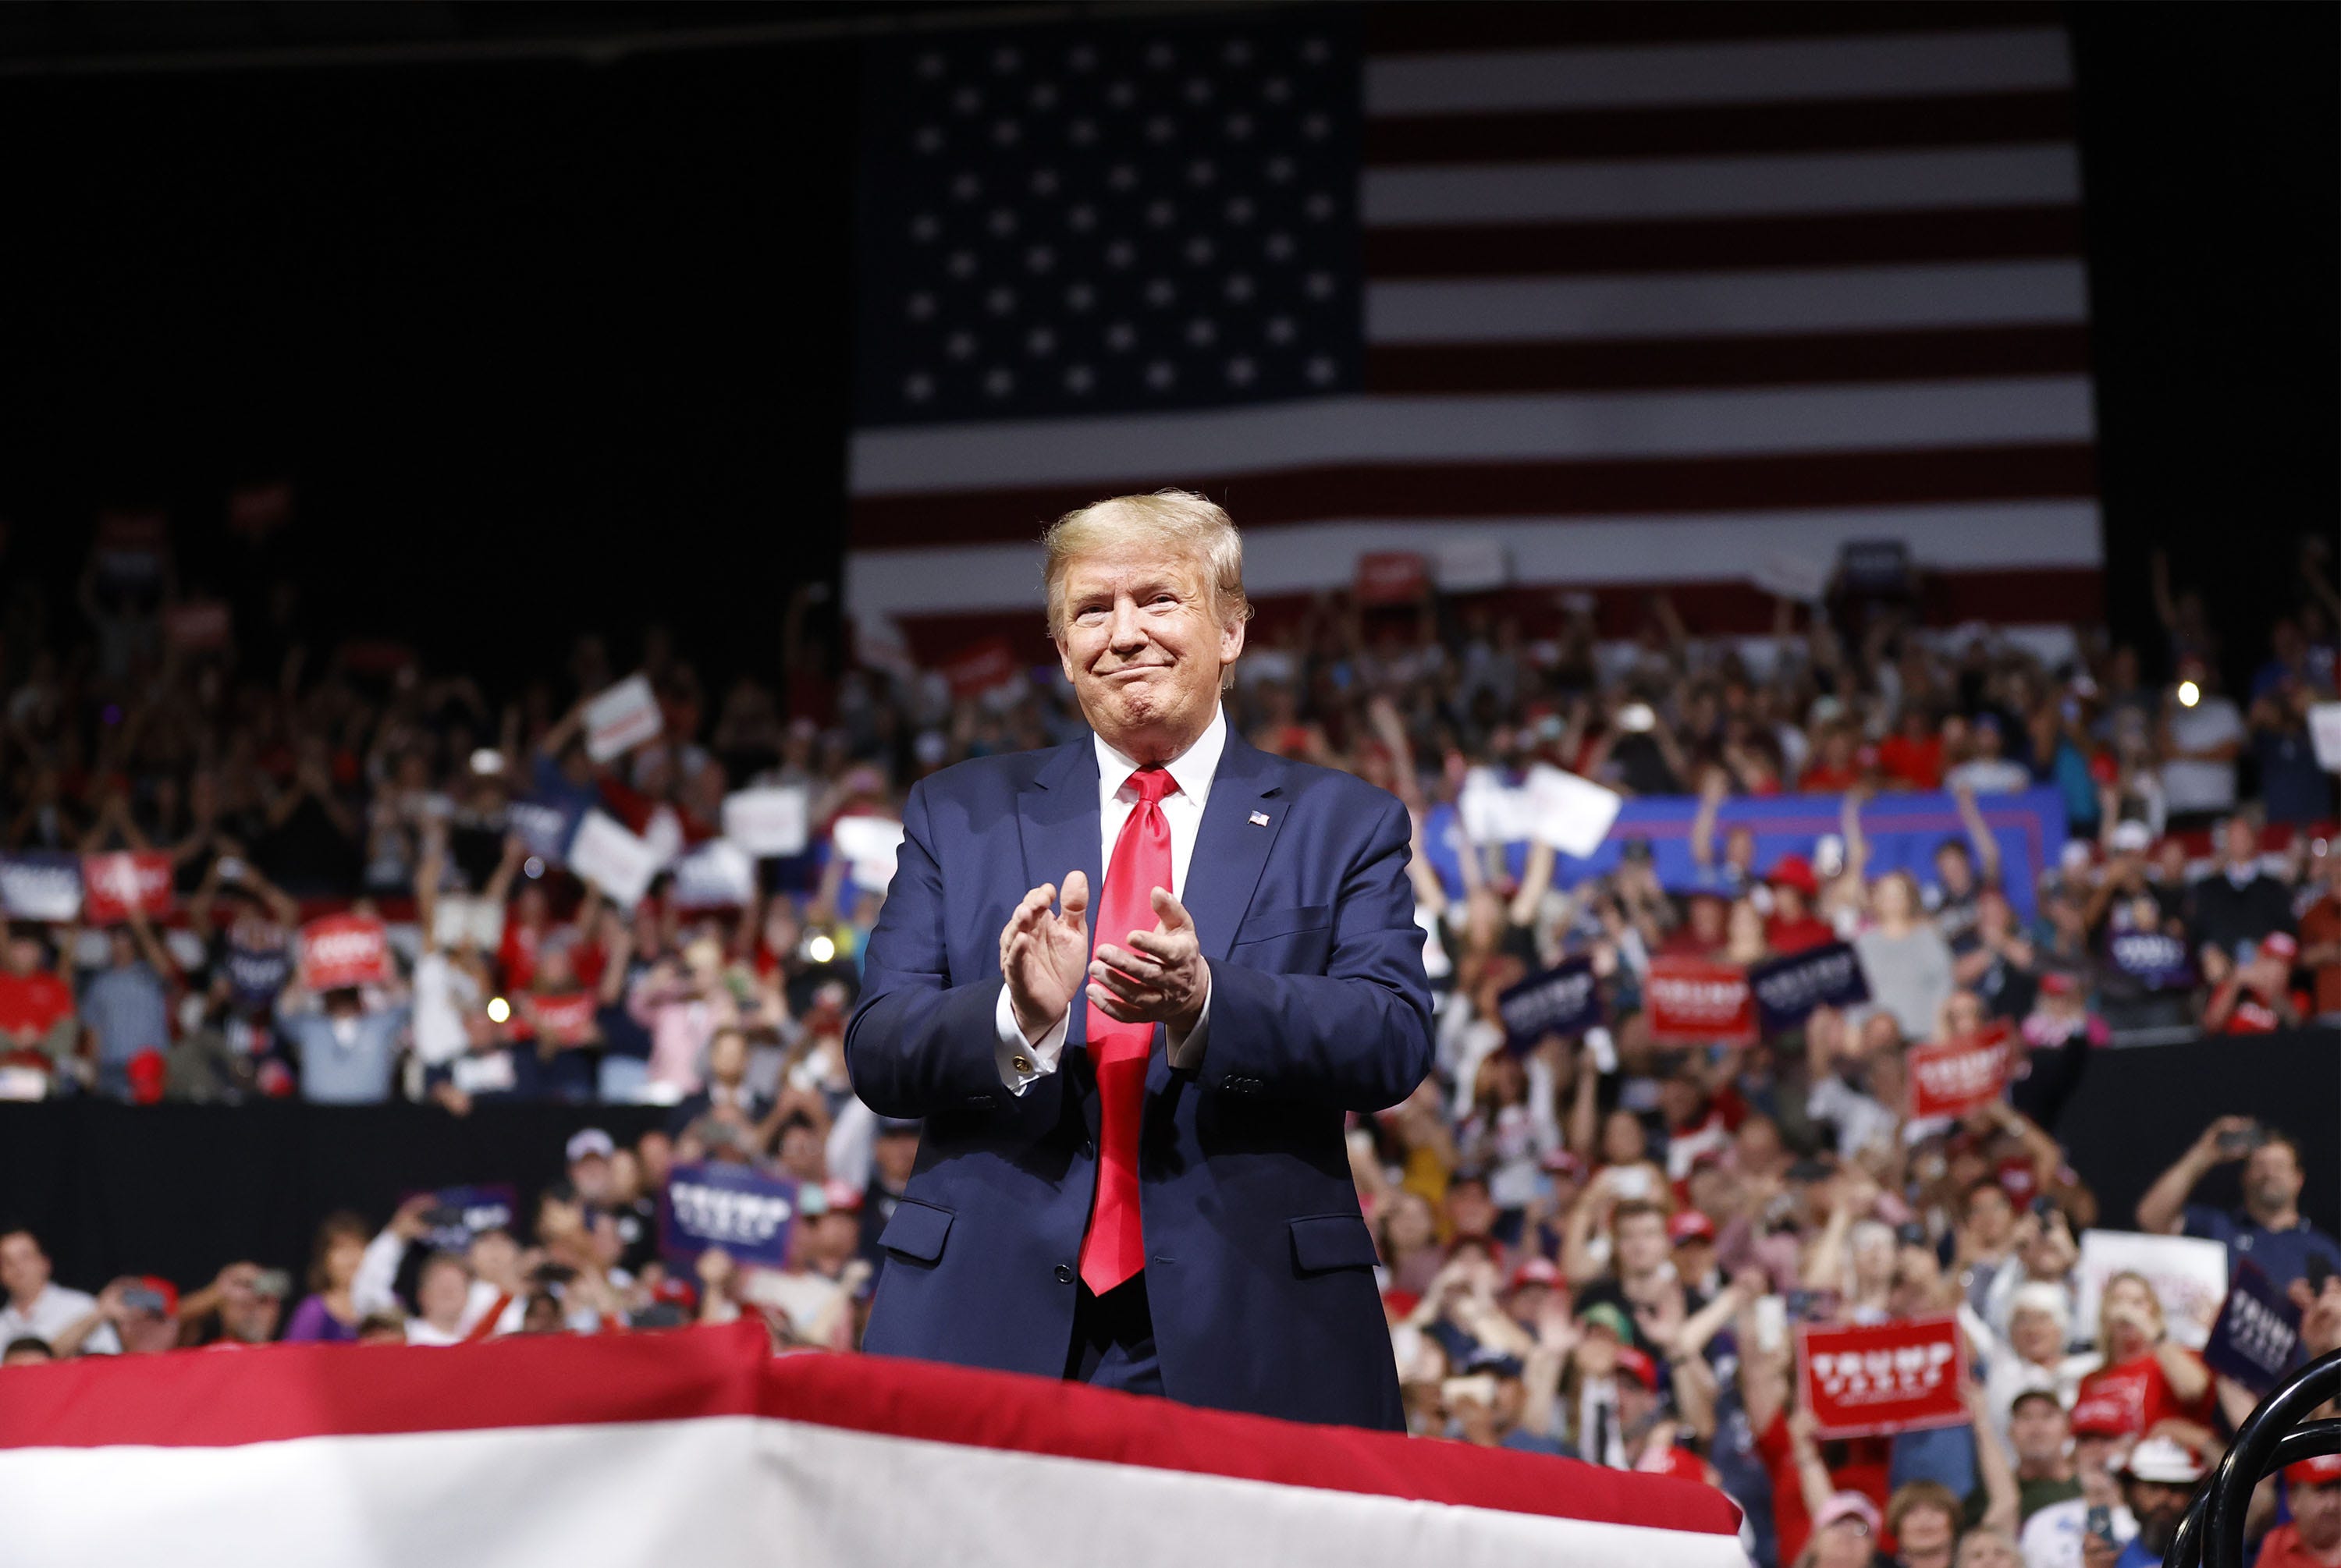 President Donald Trump’s electrifying optimism, shared by thousands of his supporters inside the Veterans Memorial Coliseum in Phoenix on Feb. 19, 2020, seemed rooted in political inevitability.